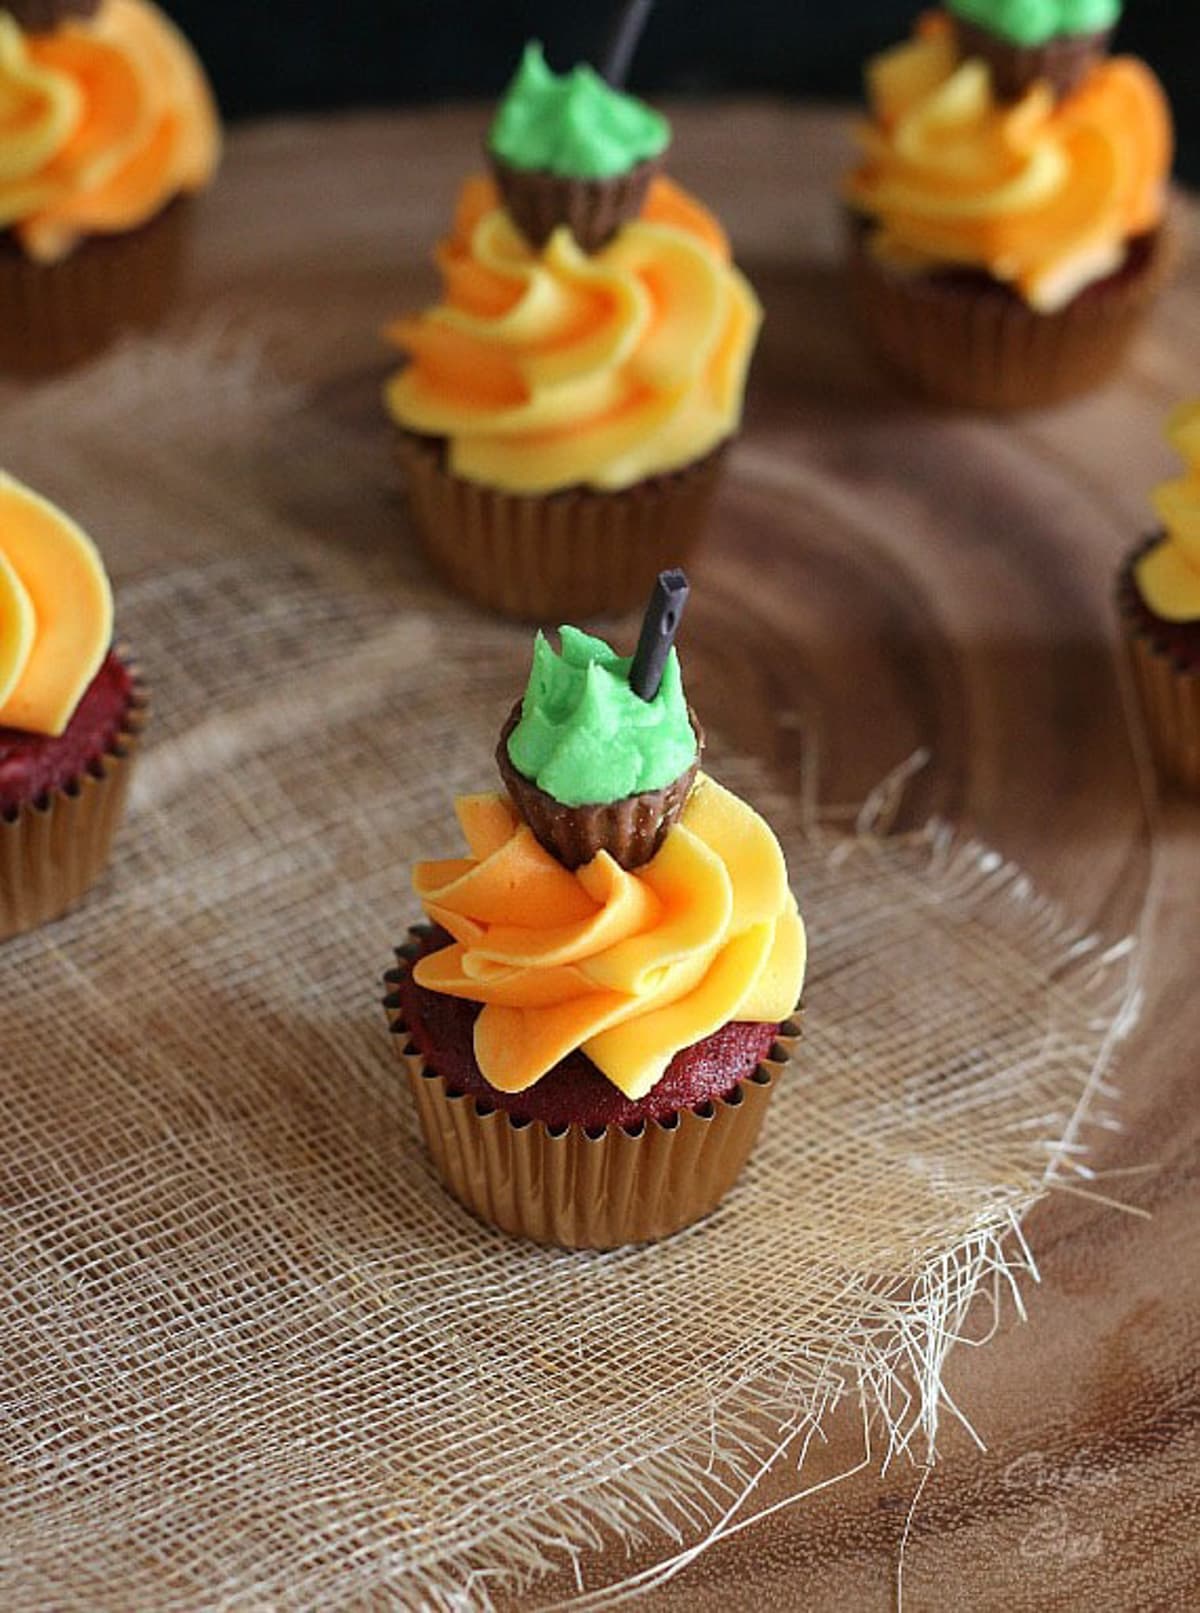 A mini red velvet cupcake topped with a swirl of orange frosting and topped with a peanut butter cup made to look like a cauldron.